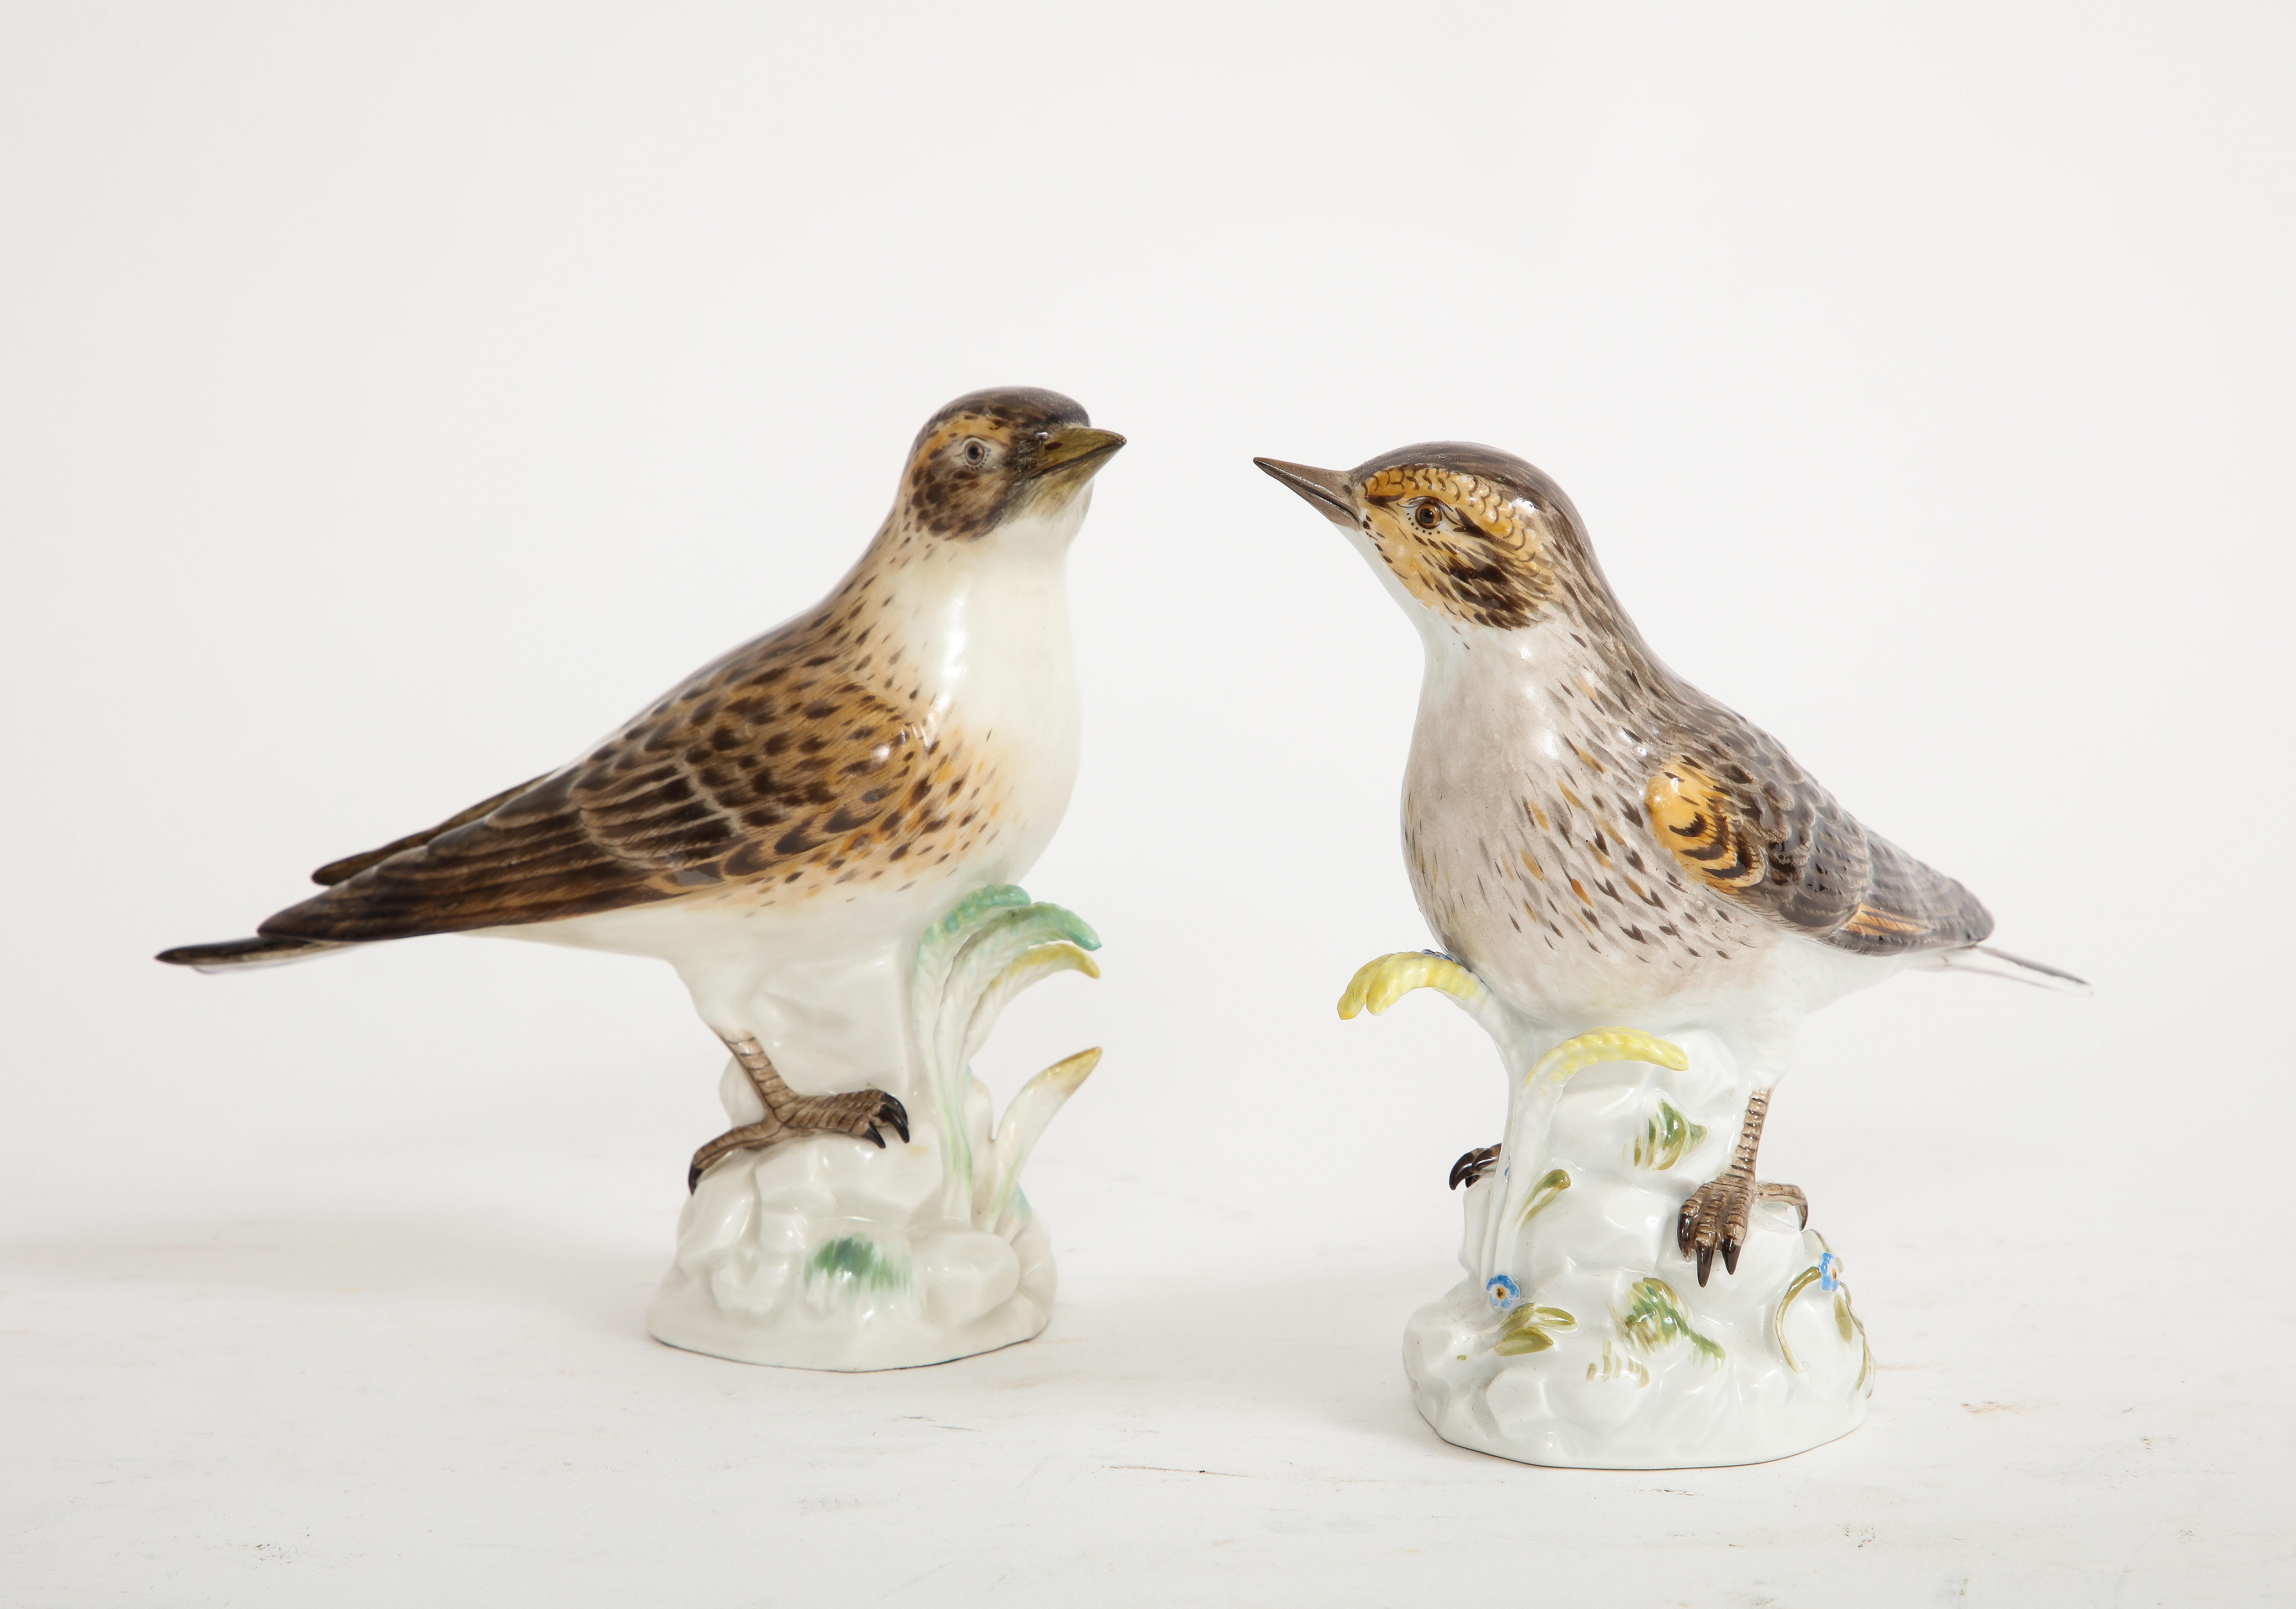 A pair of 20th century Meissen Porcelain models of brown fieldfare birds. Each is naturalistically modeled perched on a white tree stomp with ferns and flowers. They are truly beautiful and very collectable as Meissen porcelain birds are the finest